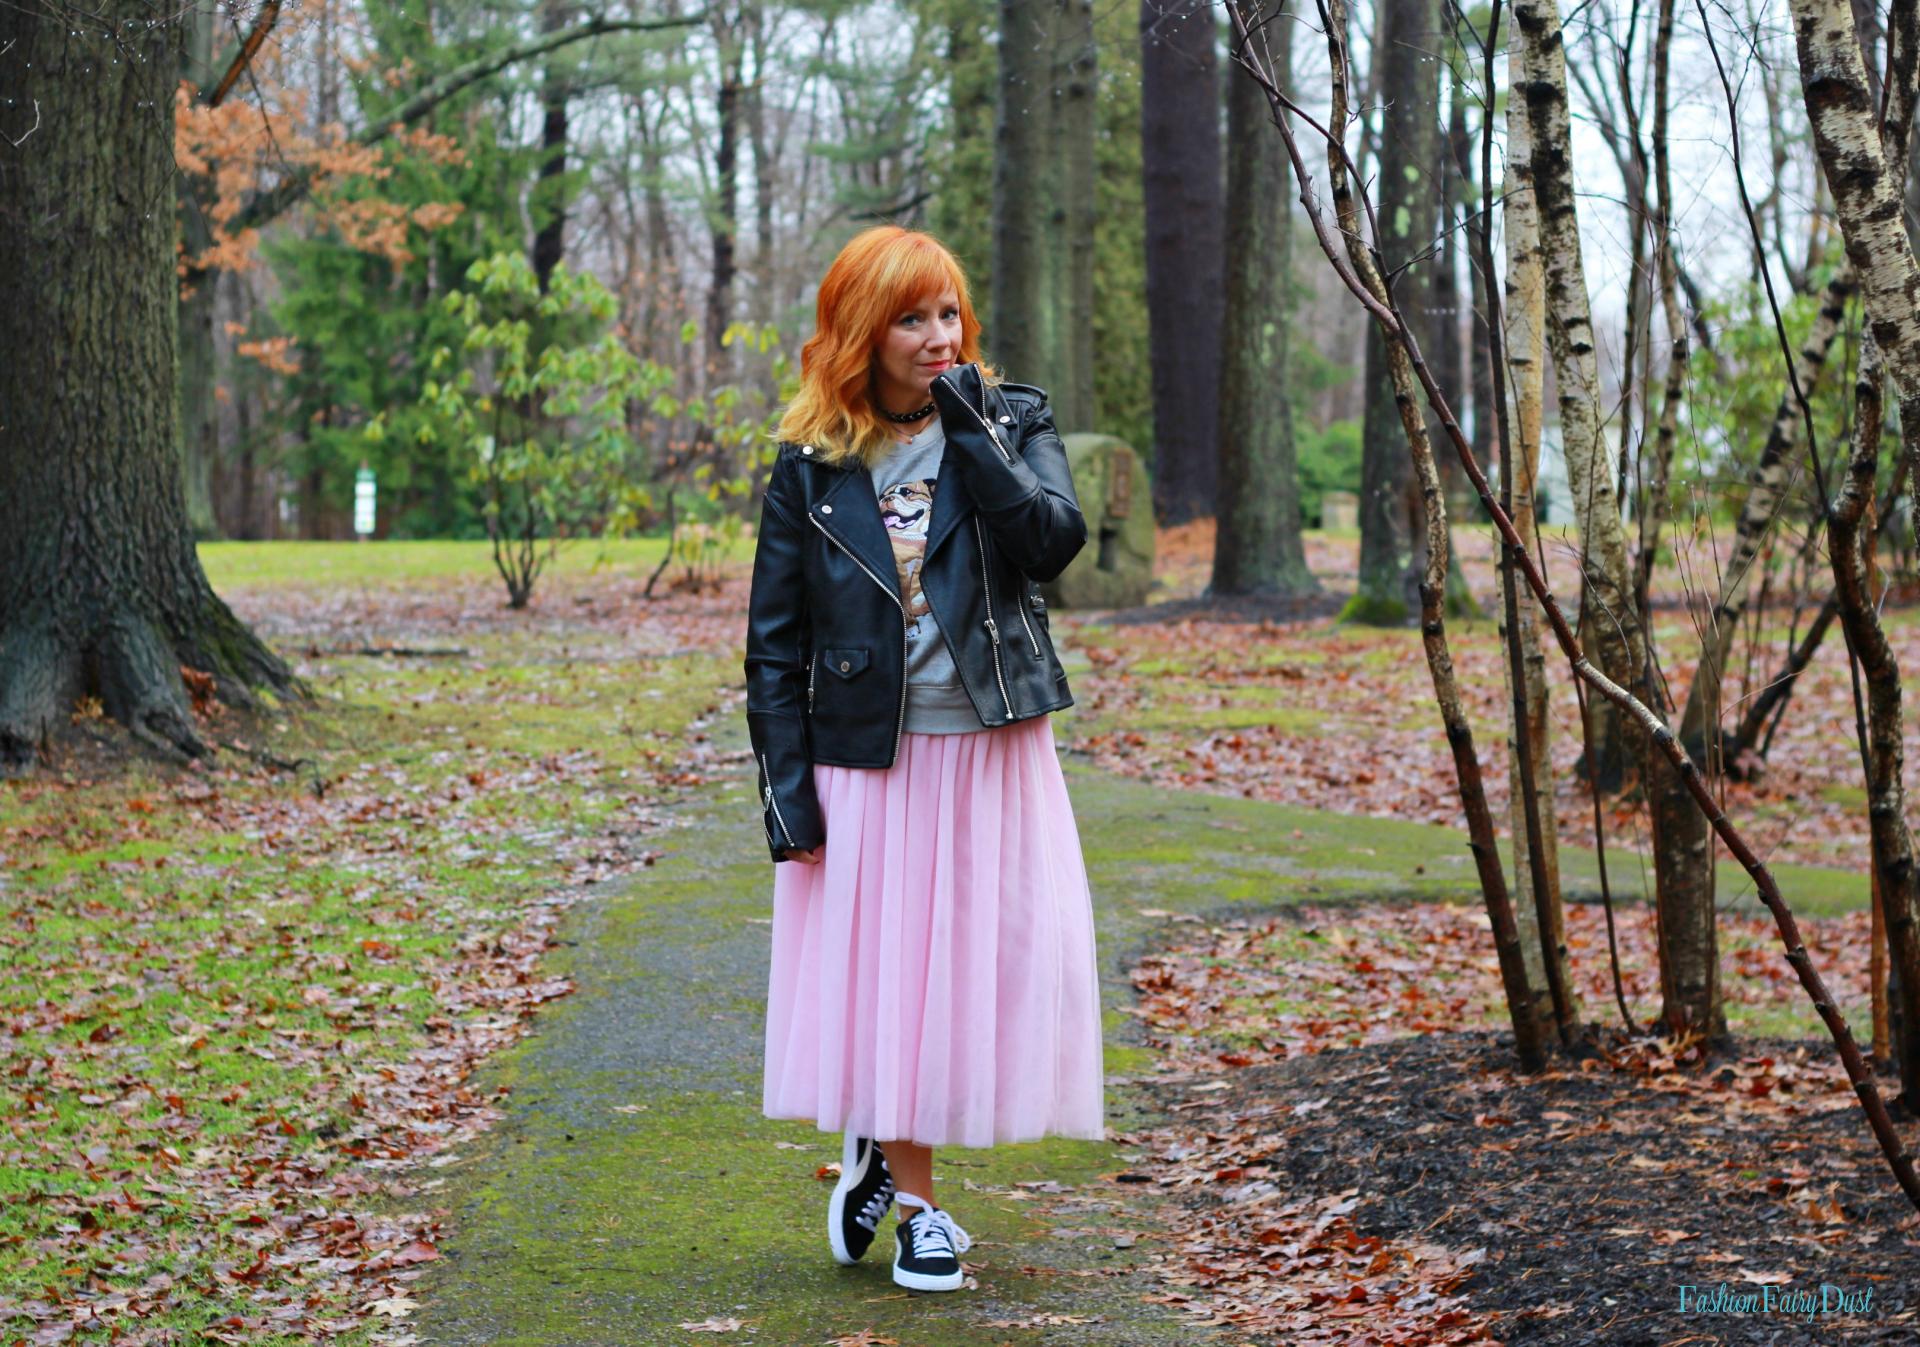 pink tulle skirt, moto jacket and Puma sneakers. How to dress down a tulle skirt.